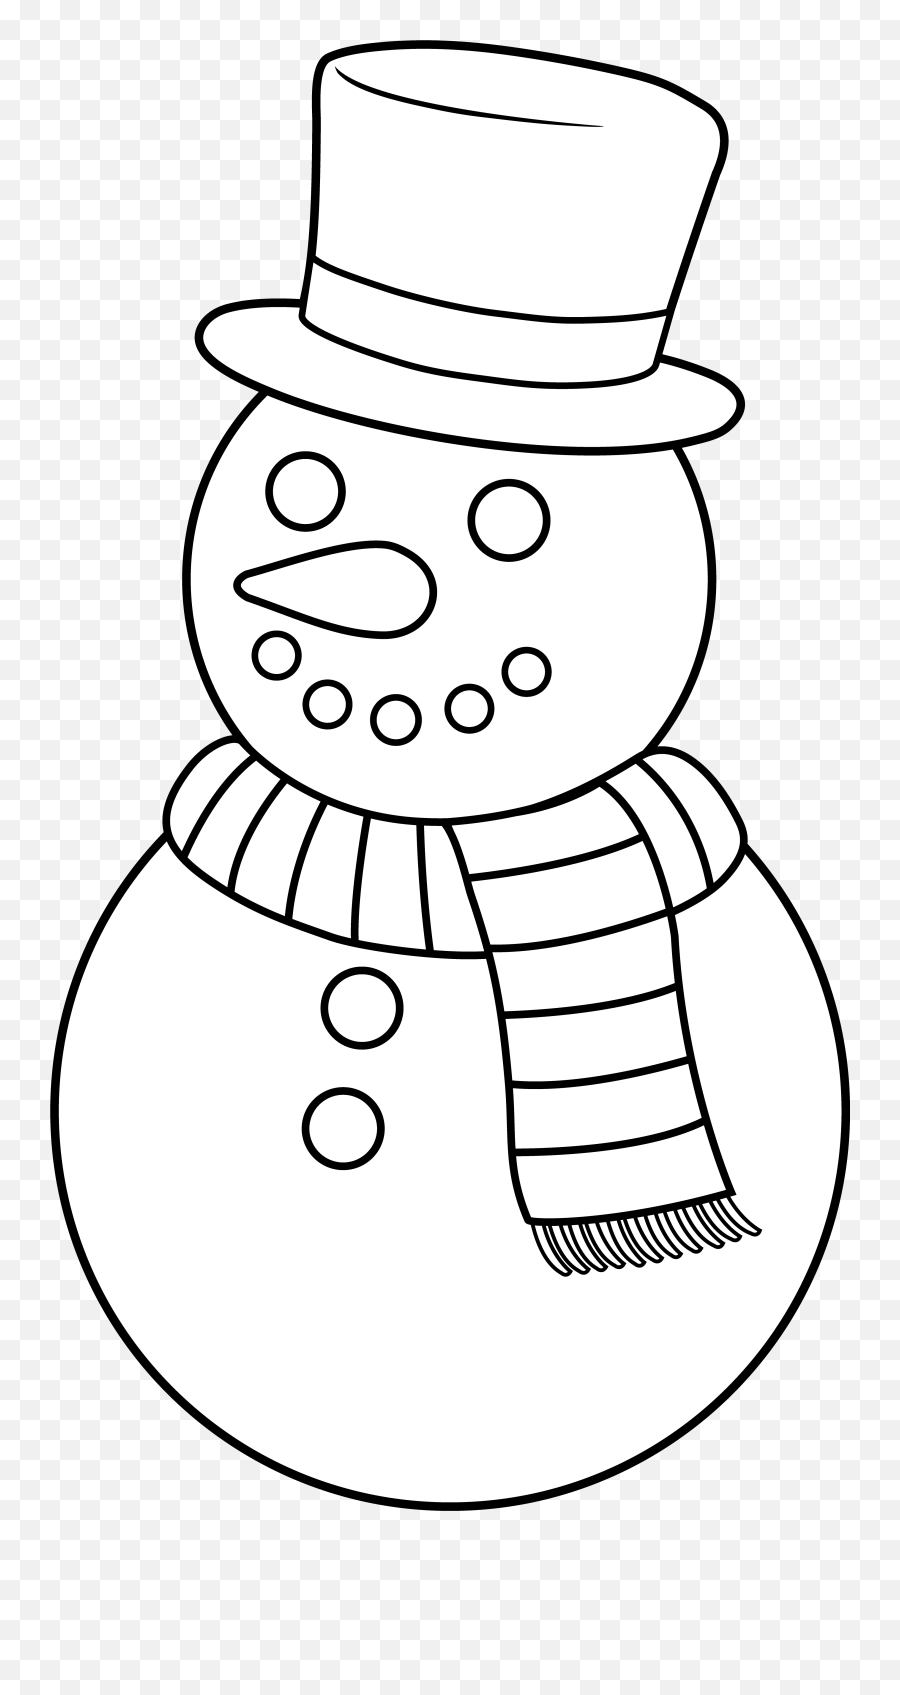 Colorable Christmas Snowman - Christmas Clipart Black And Clipart Outline Snowman Emoji,Snowman Emoji With Snow